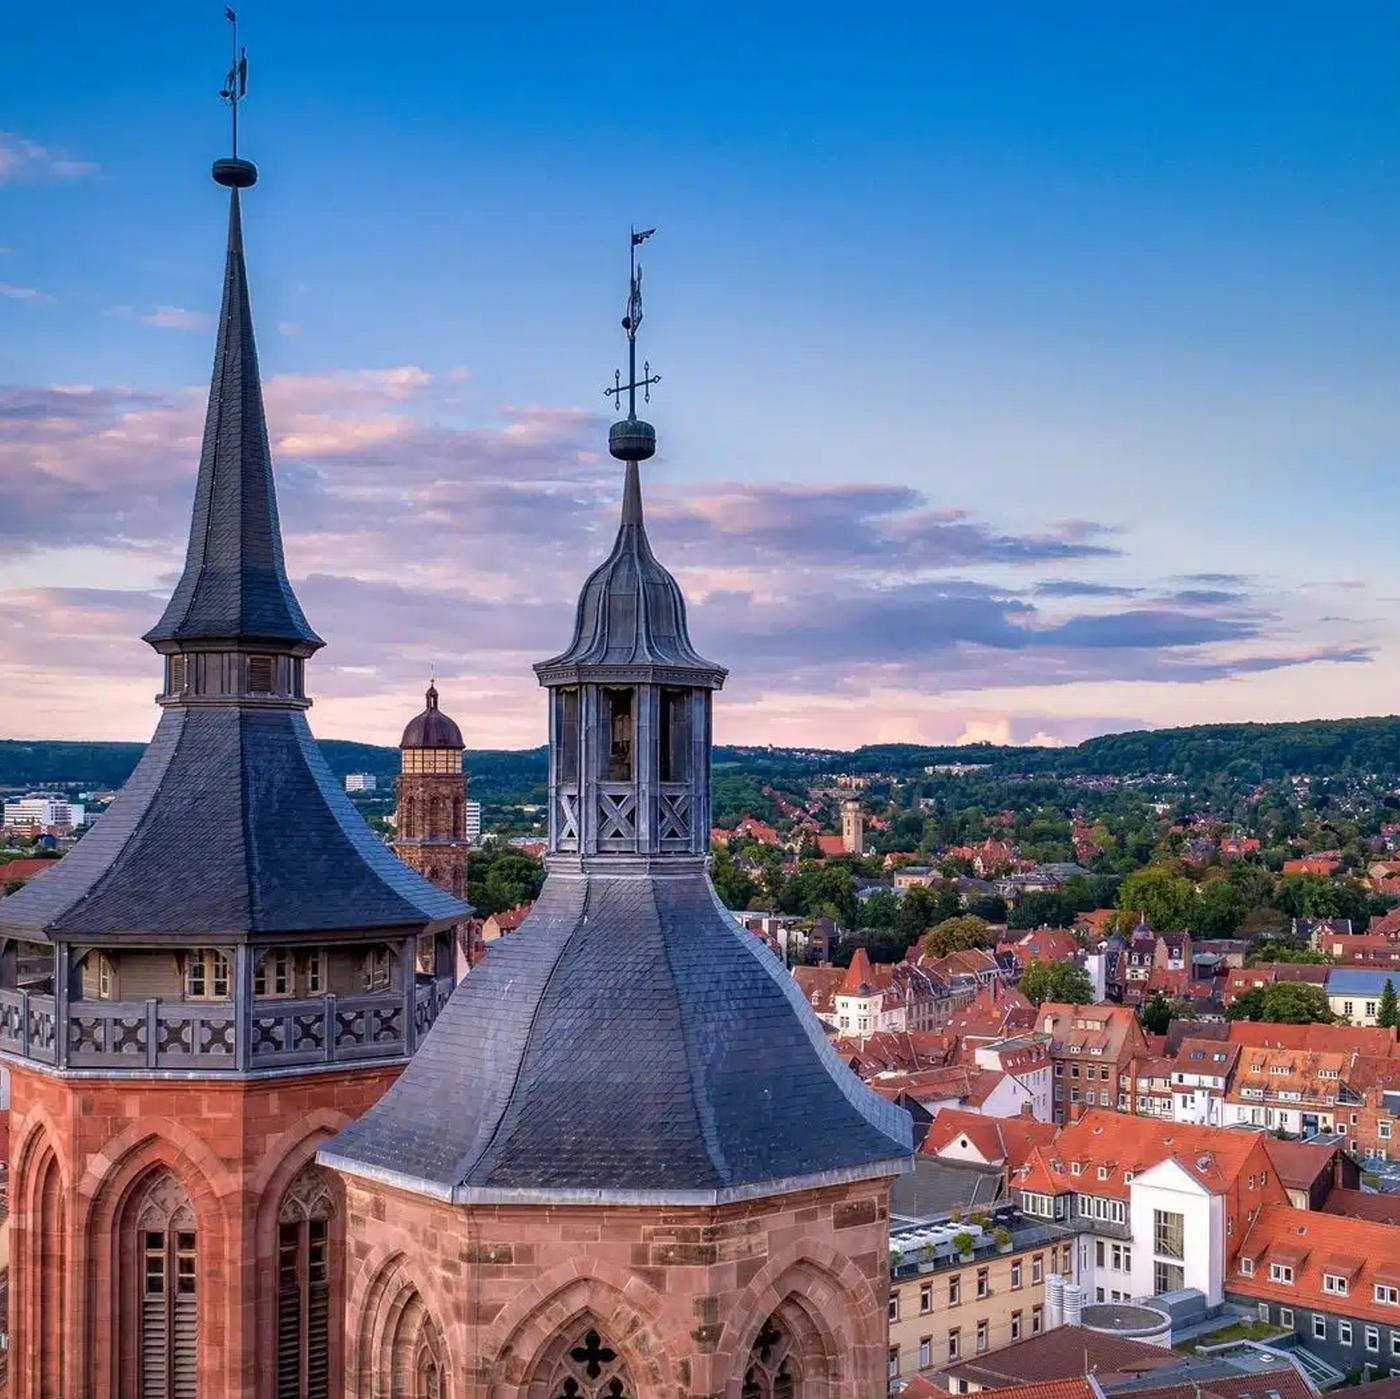 Discover Göttingen
in a new way.